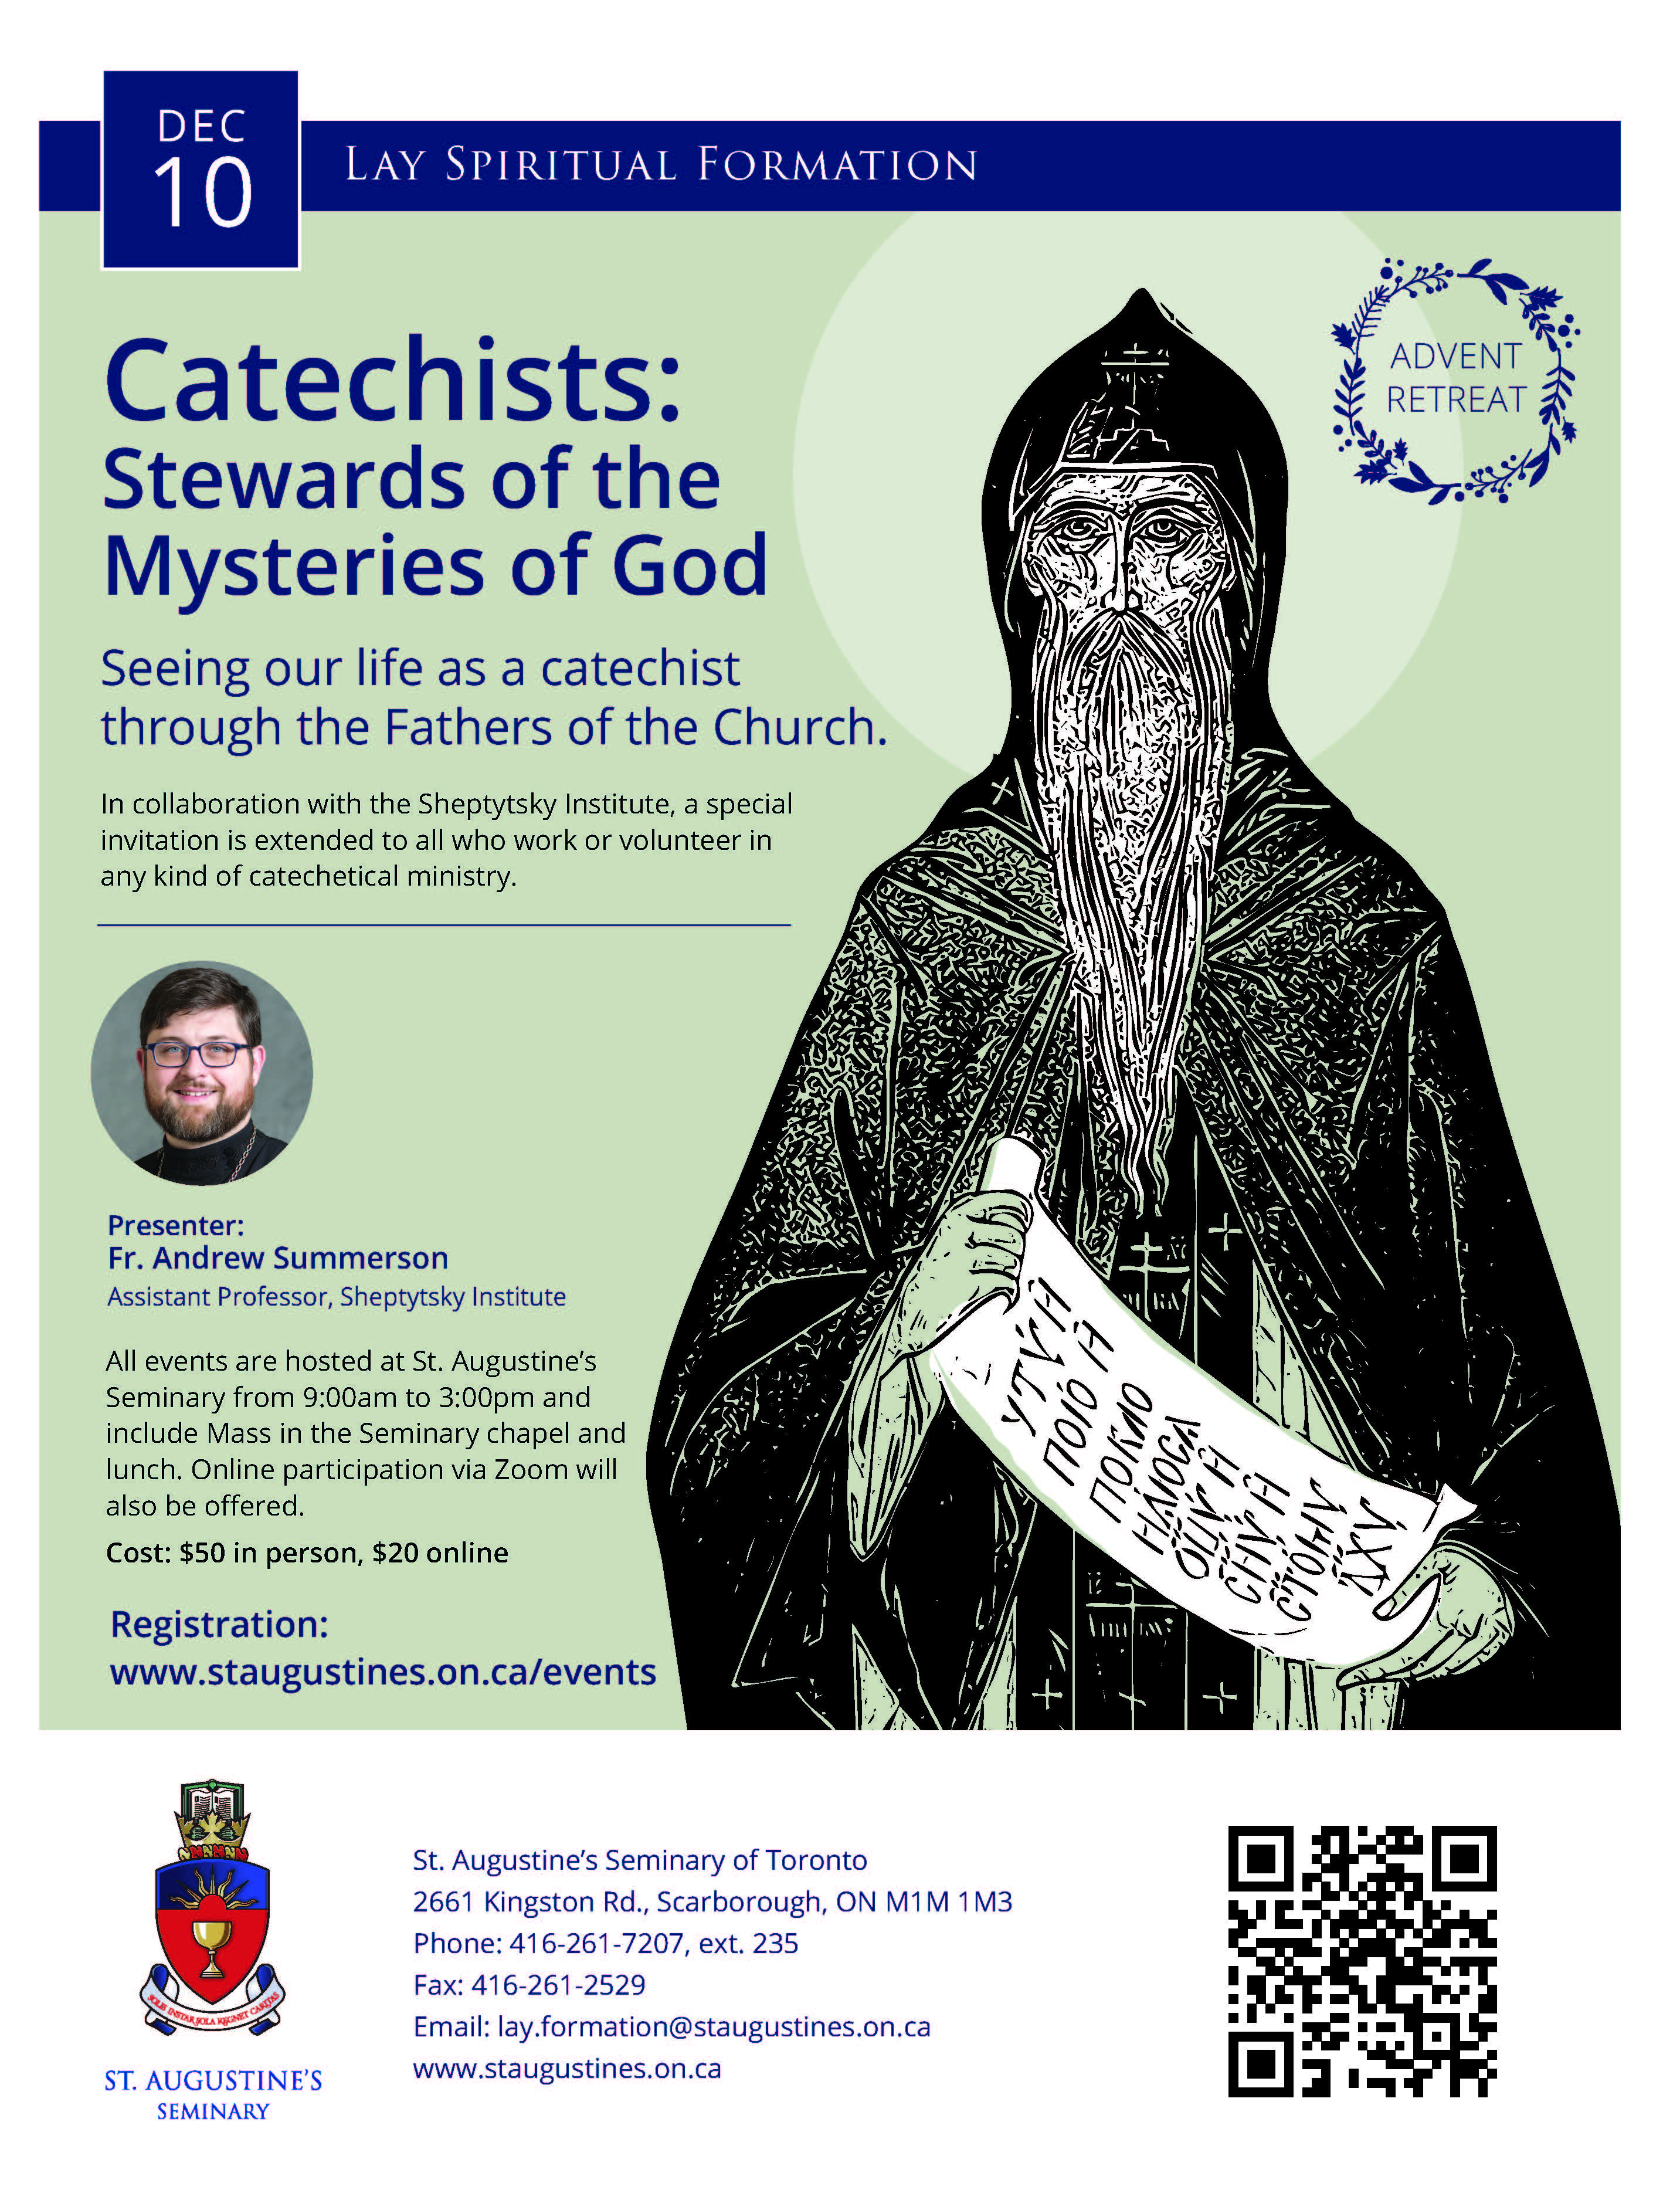 Lay Spiritual Formation Series, Advent Retreat - Catechists: Stewards of the Mysteries of God